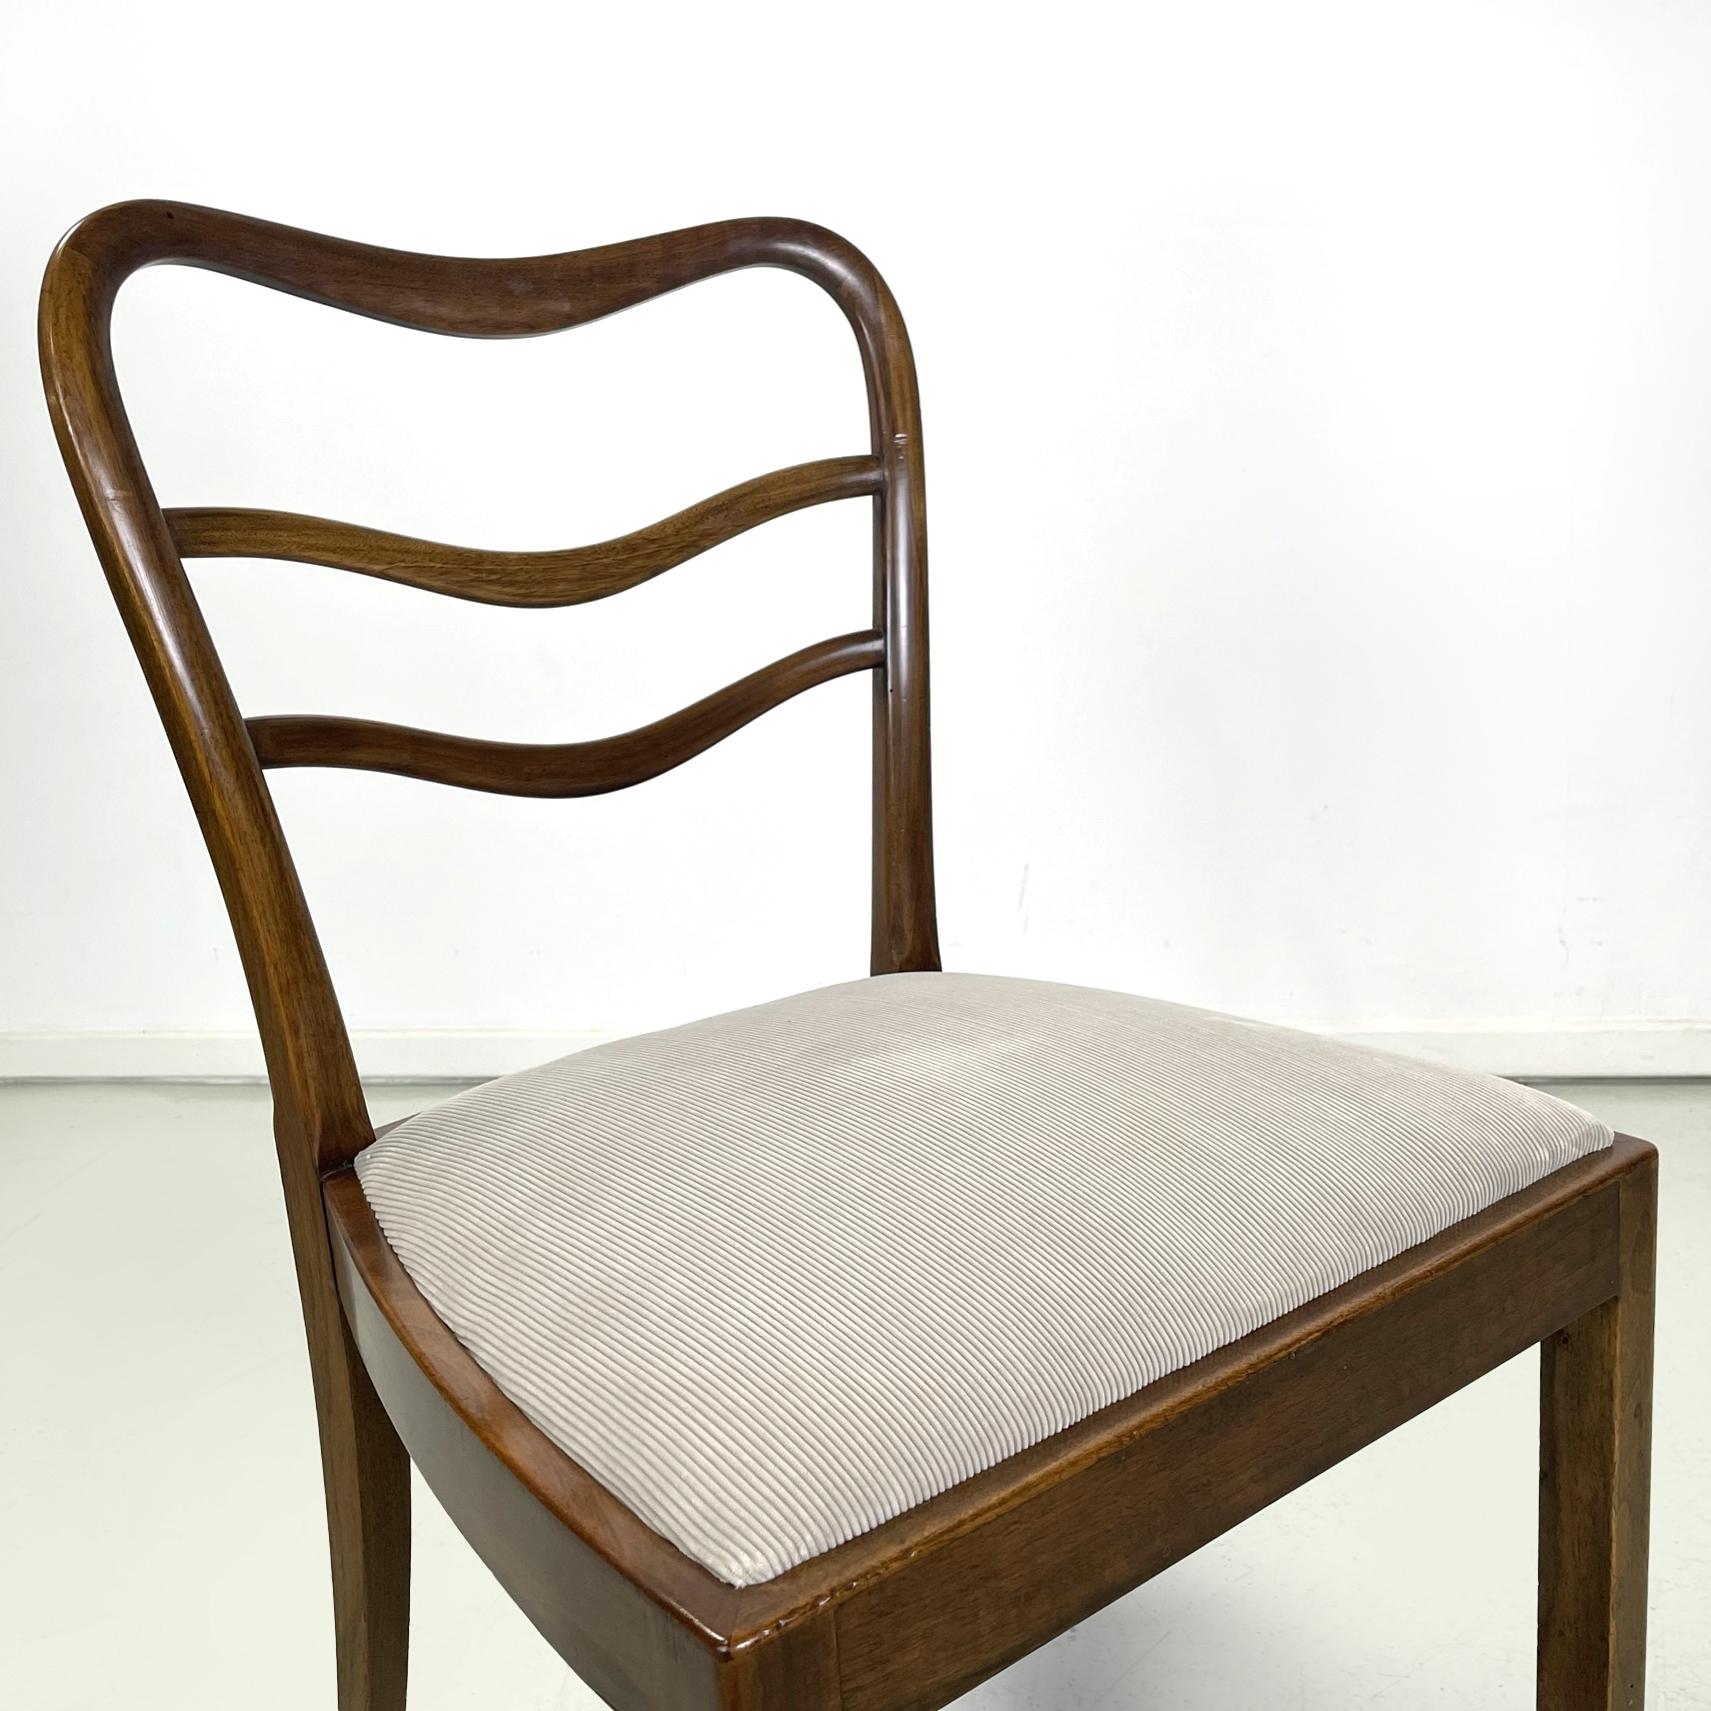 Wood Hungary Art Deco Chairs in wood and beige corduroy velvet, 1930s For Sale